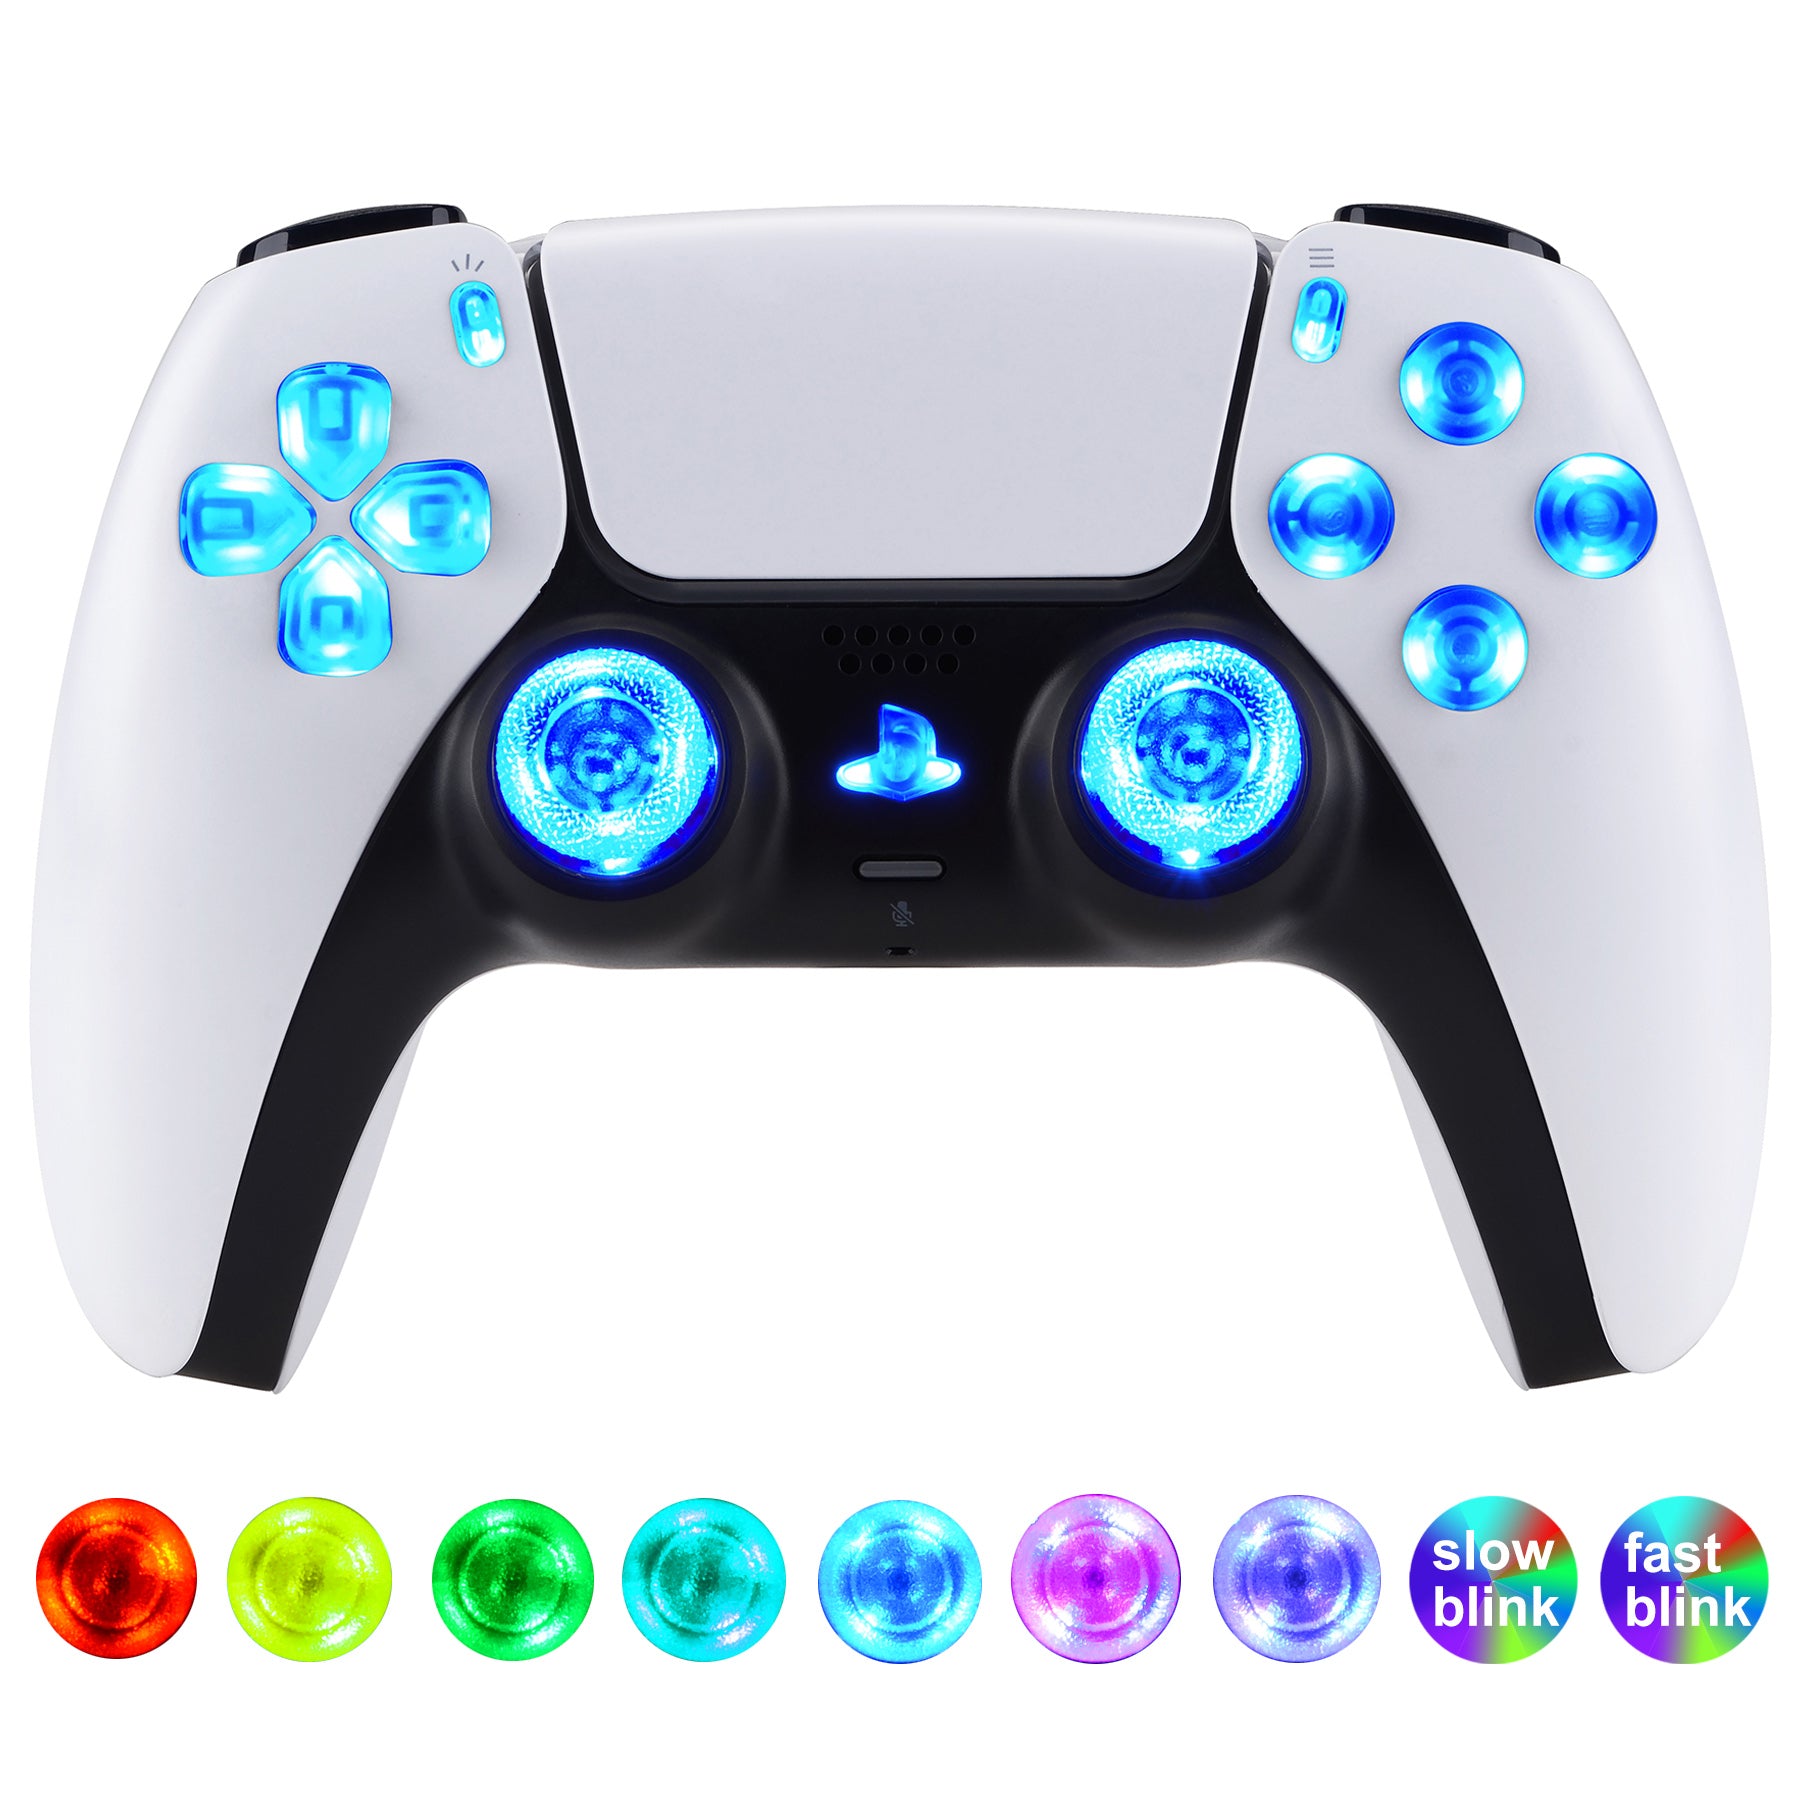 Ps5 Led Controller Accessories, Ps5 Controller Buttons Led